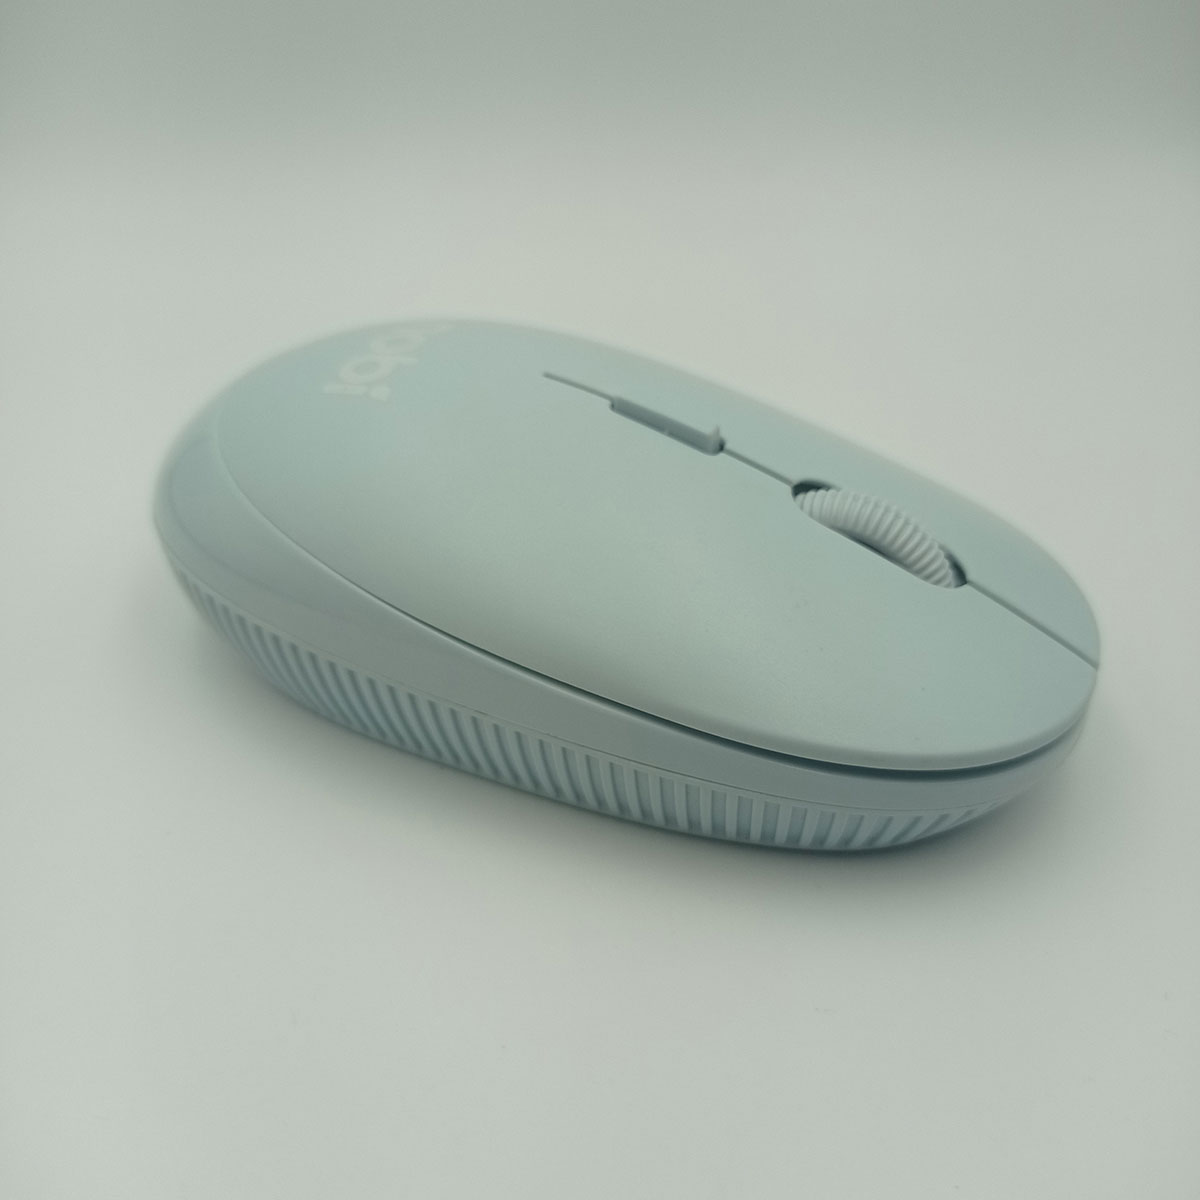 nm71-wireless-mouse-blue-01